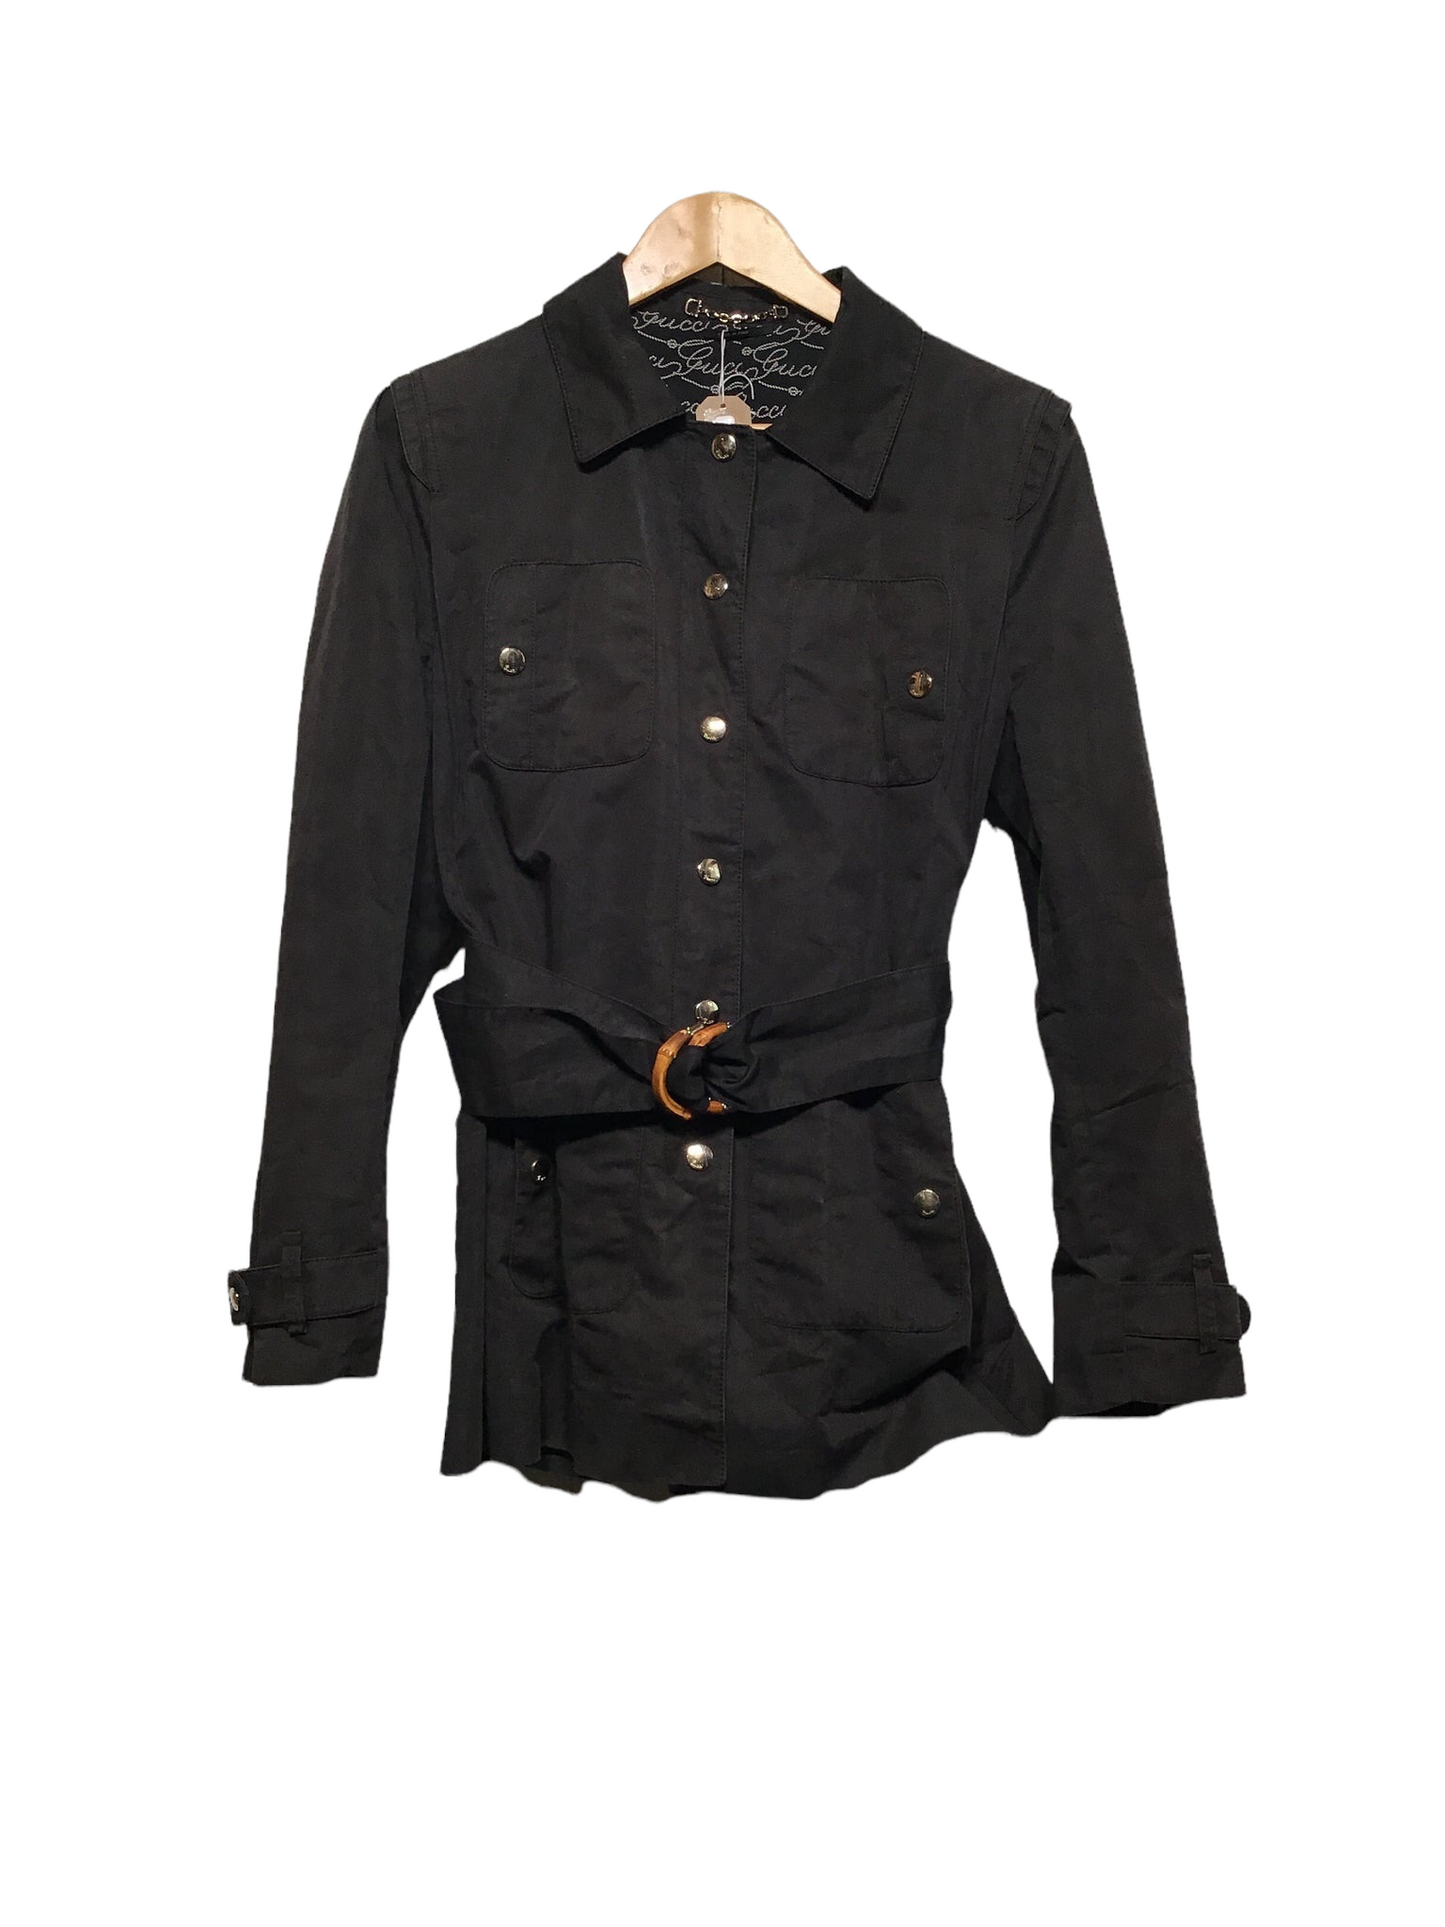 Gucci Jacket with Classic Wooden Buckle (Size S)